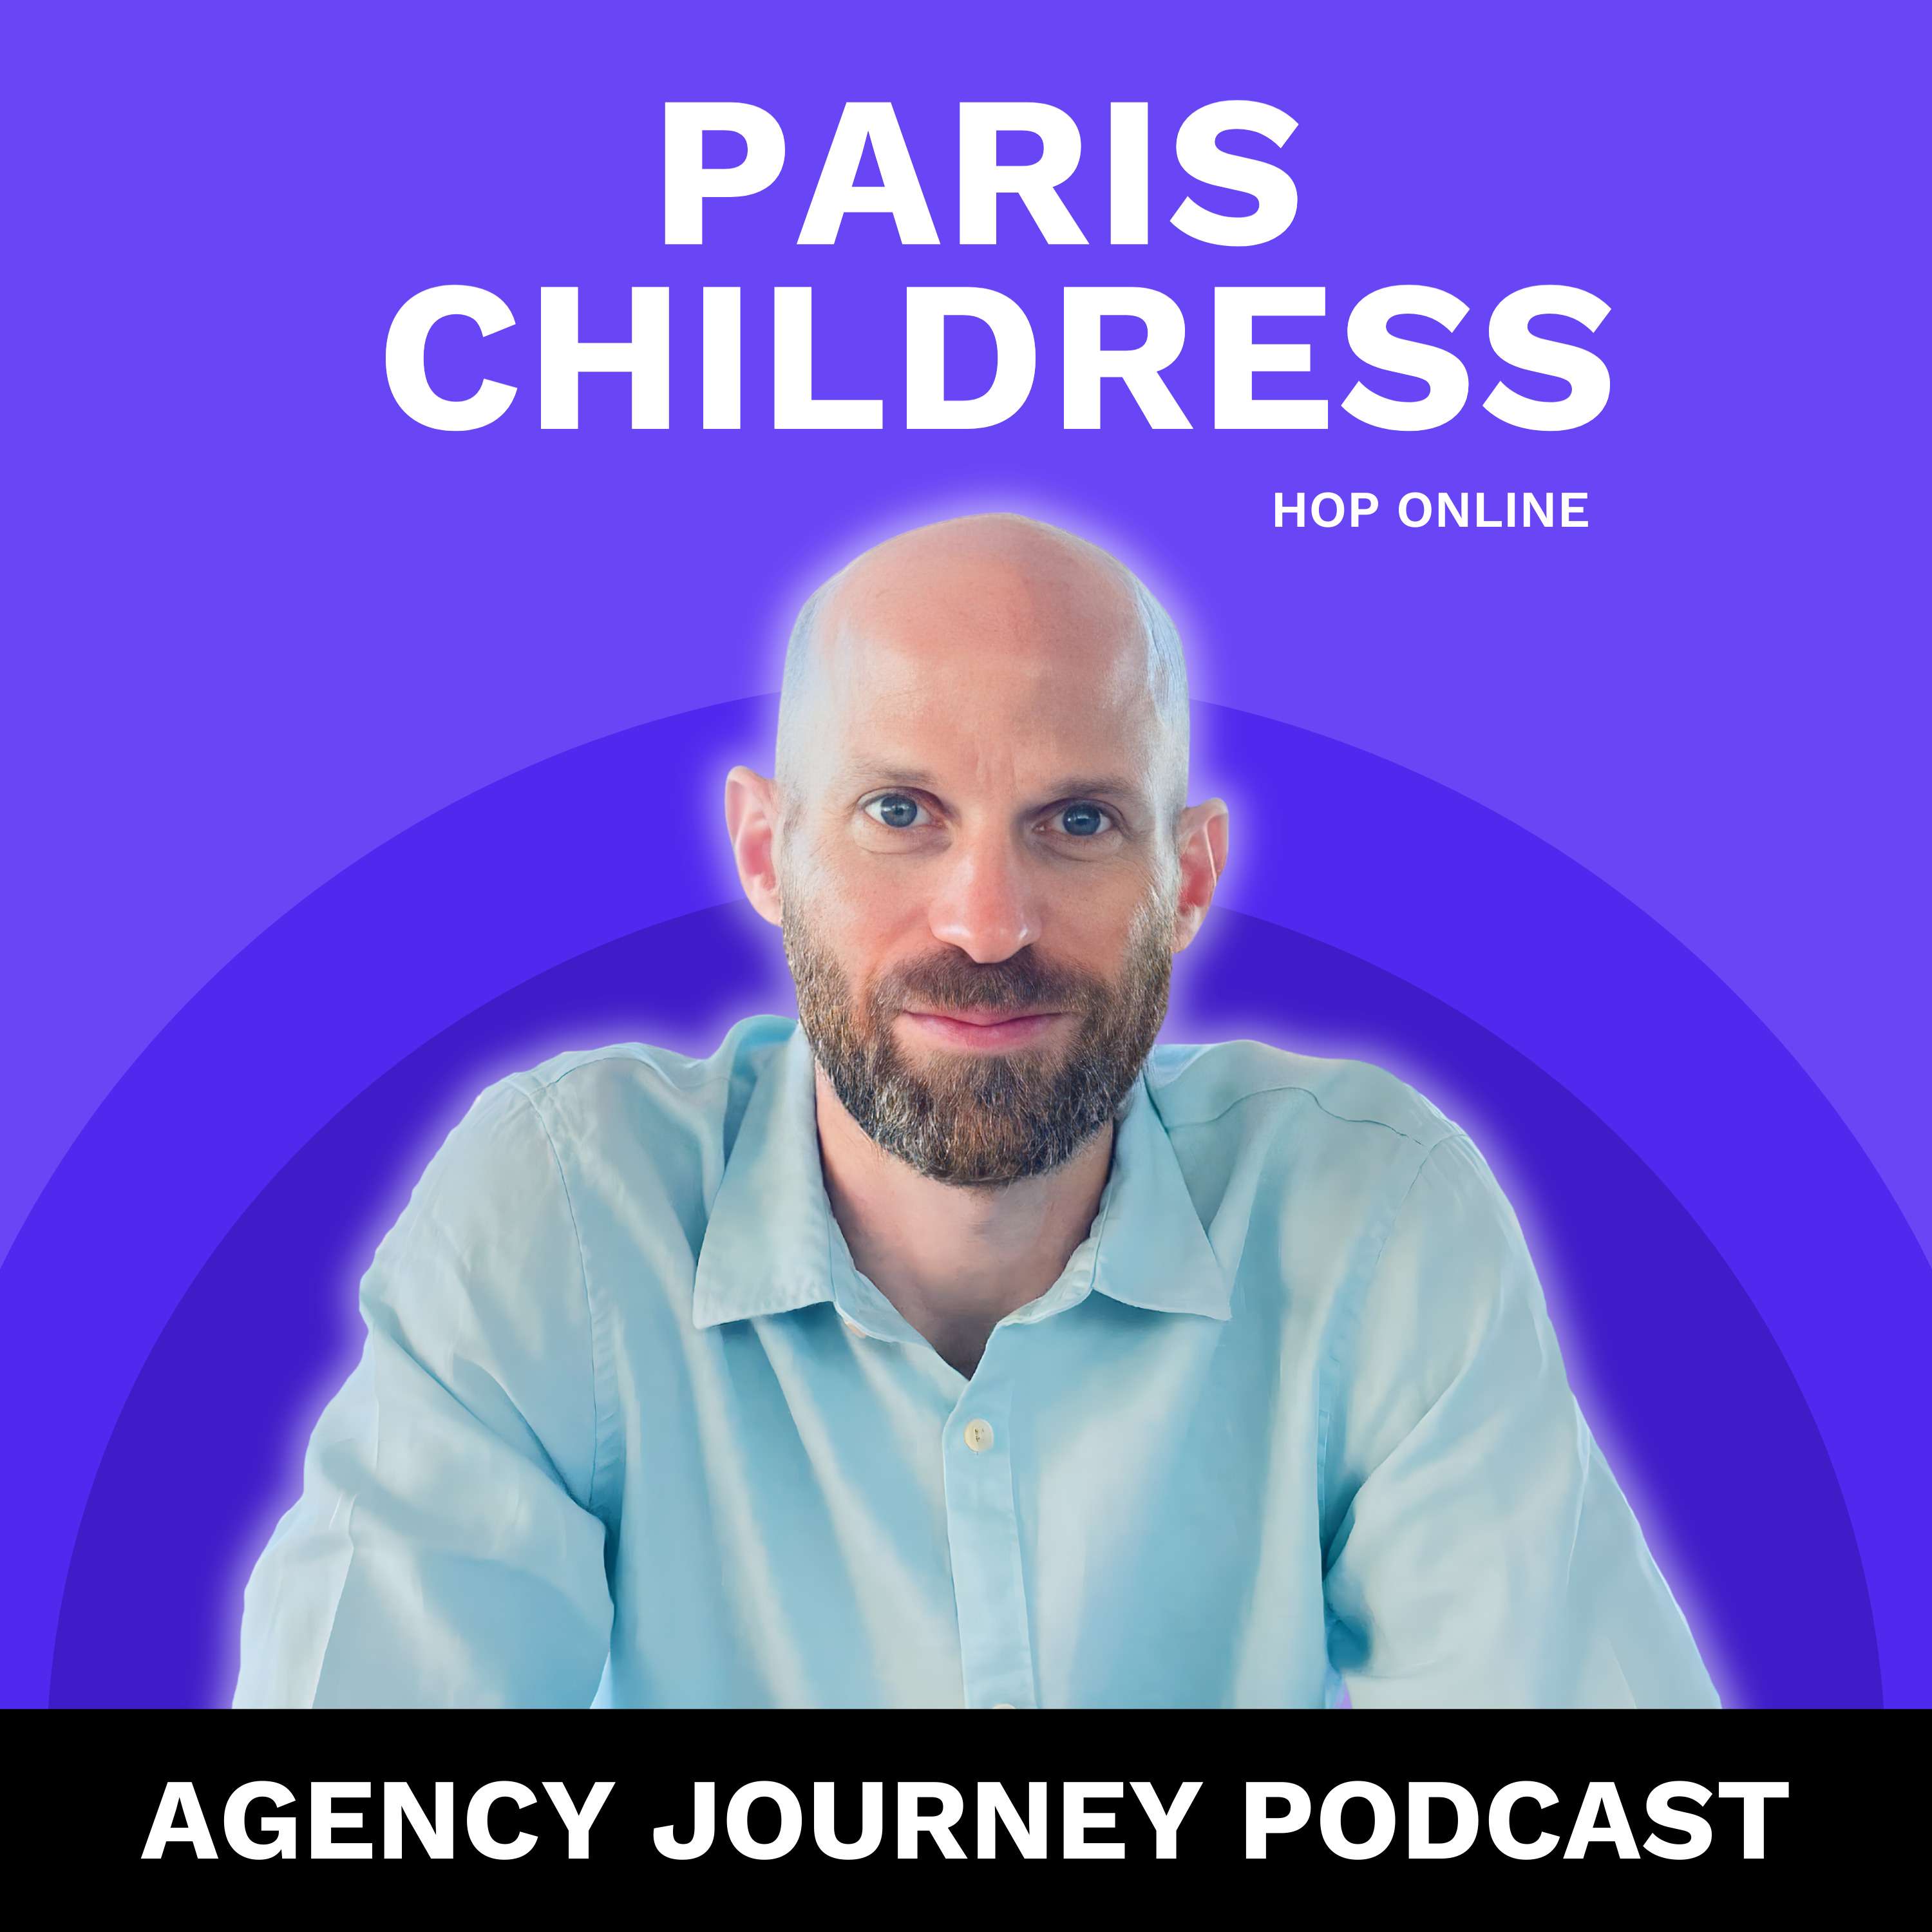 The Cookieless Future, pLTV AI, Personal Branding Tactics, and Running a ClickUp CRM with Paris Childress